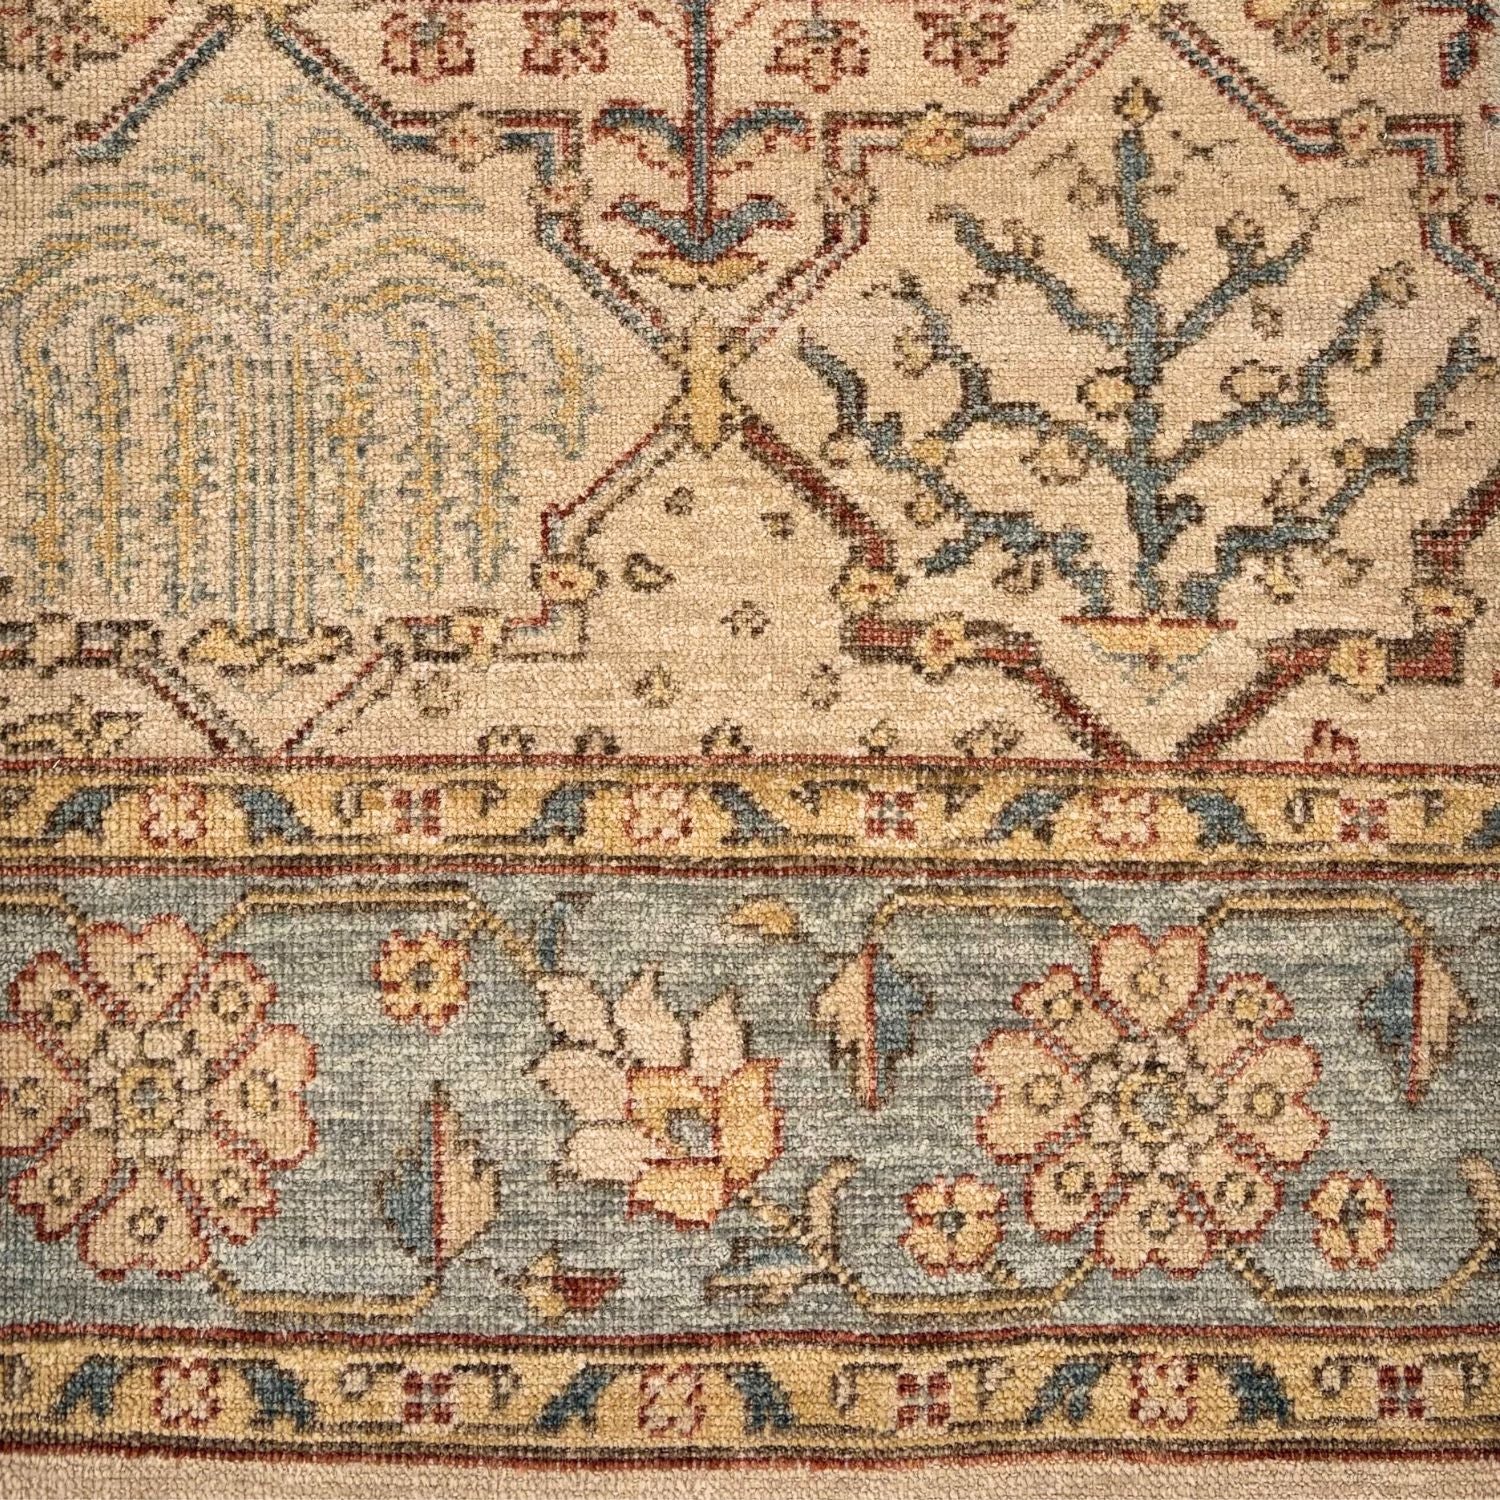 Detail of a traditional Old World rug with floral and geometric outlines in shades of tan, rust and blue.